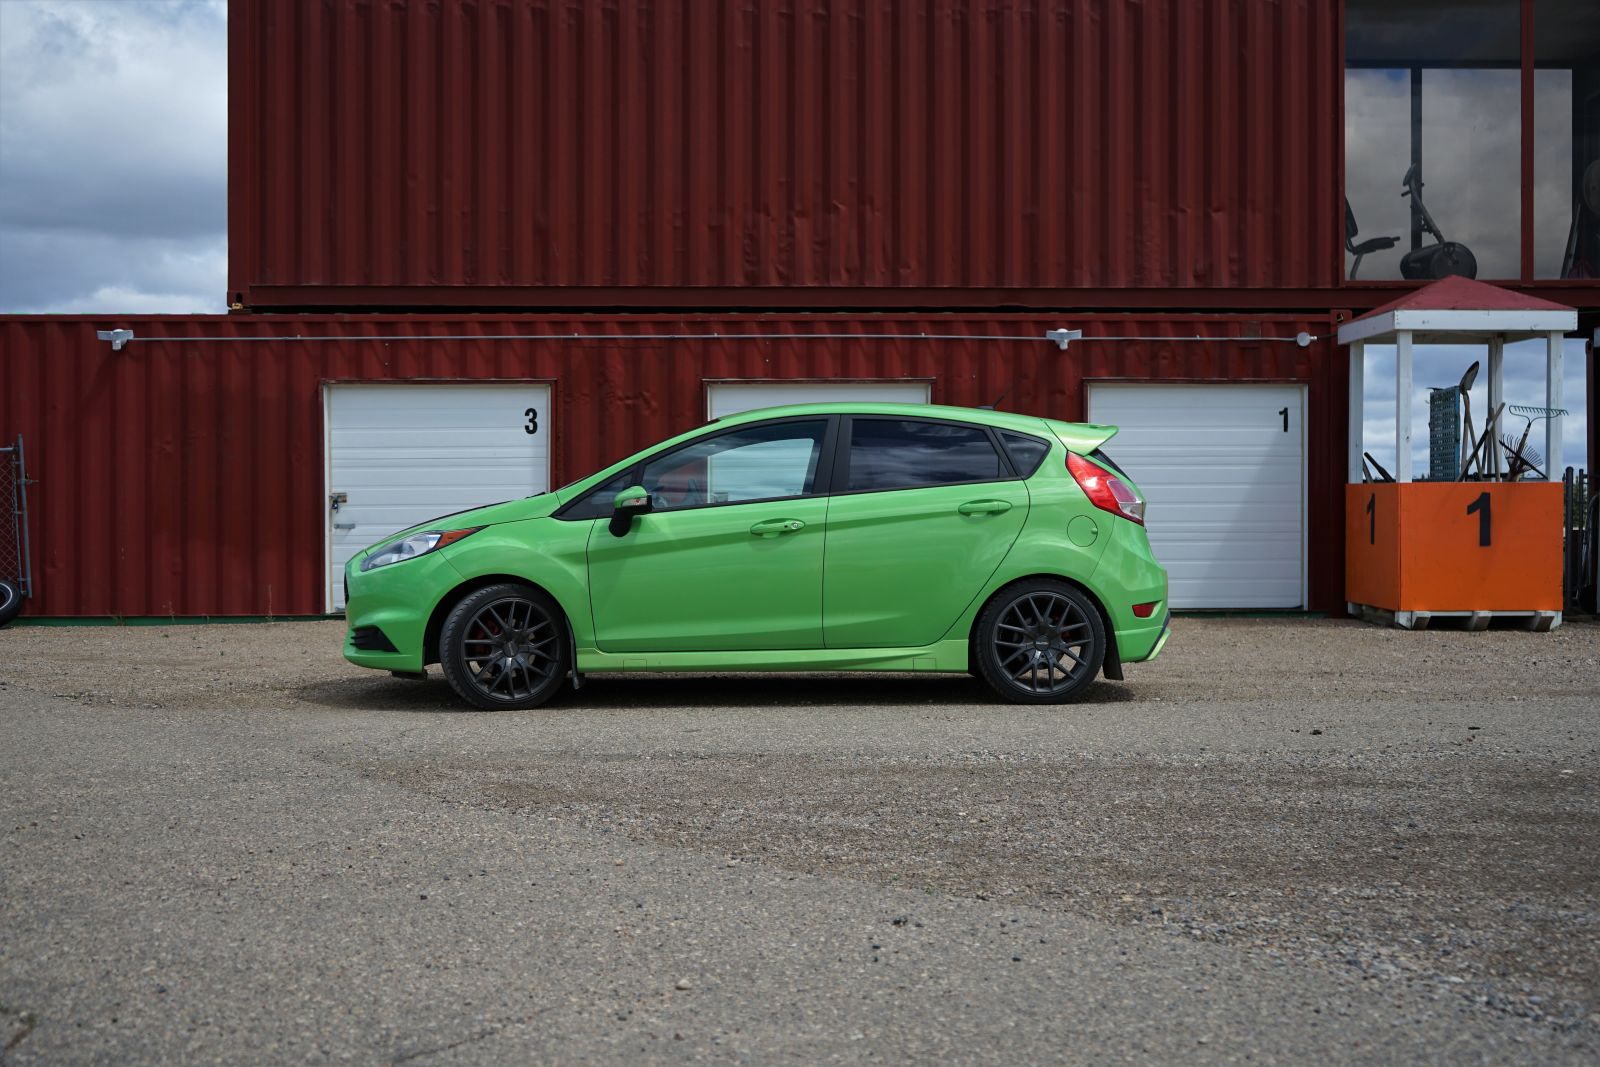 Illustration for article titled 2015 Fiesta ST: The One Year Review